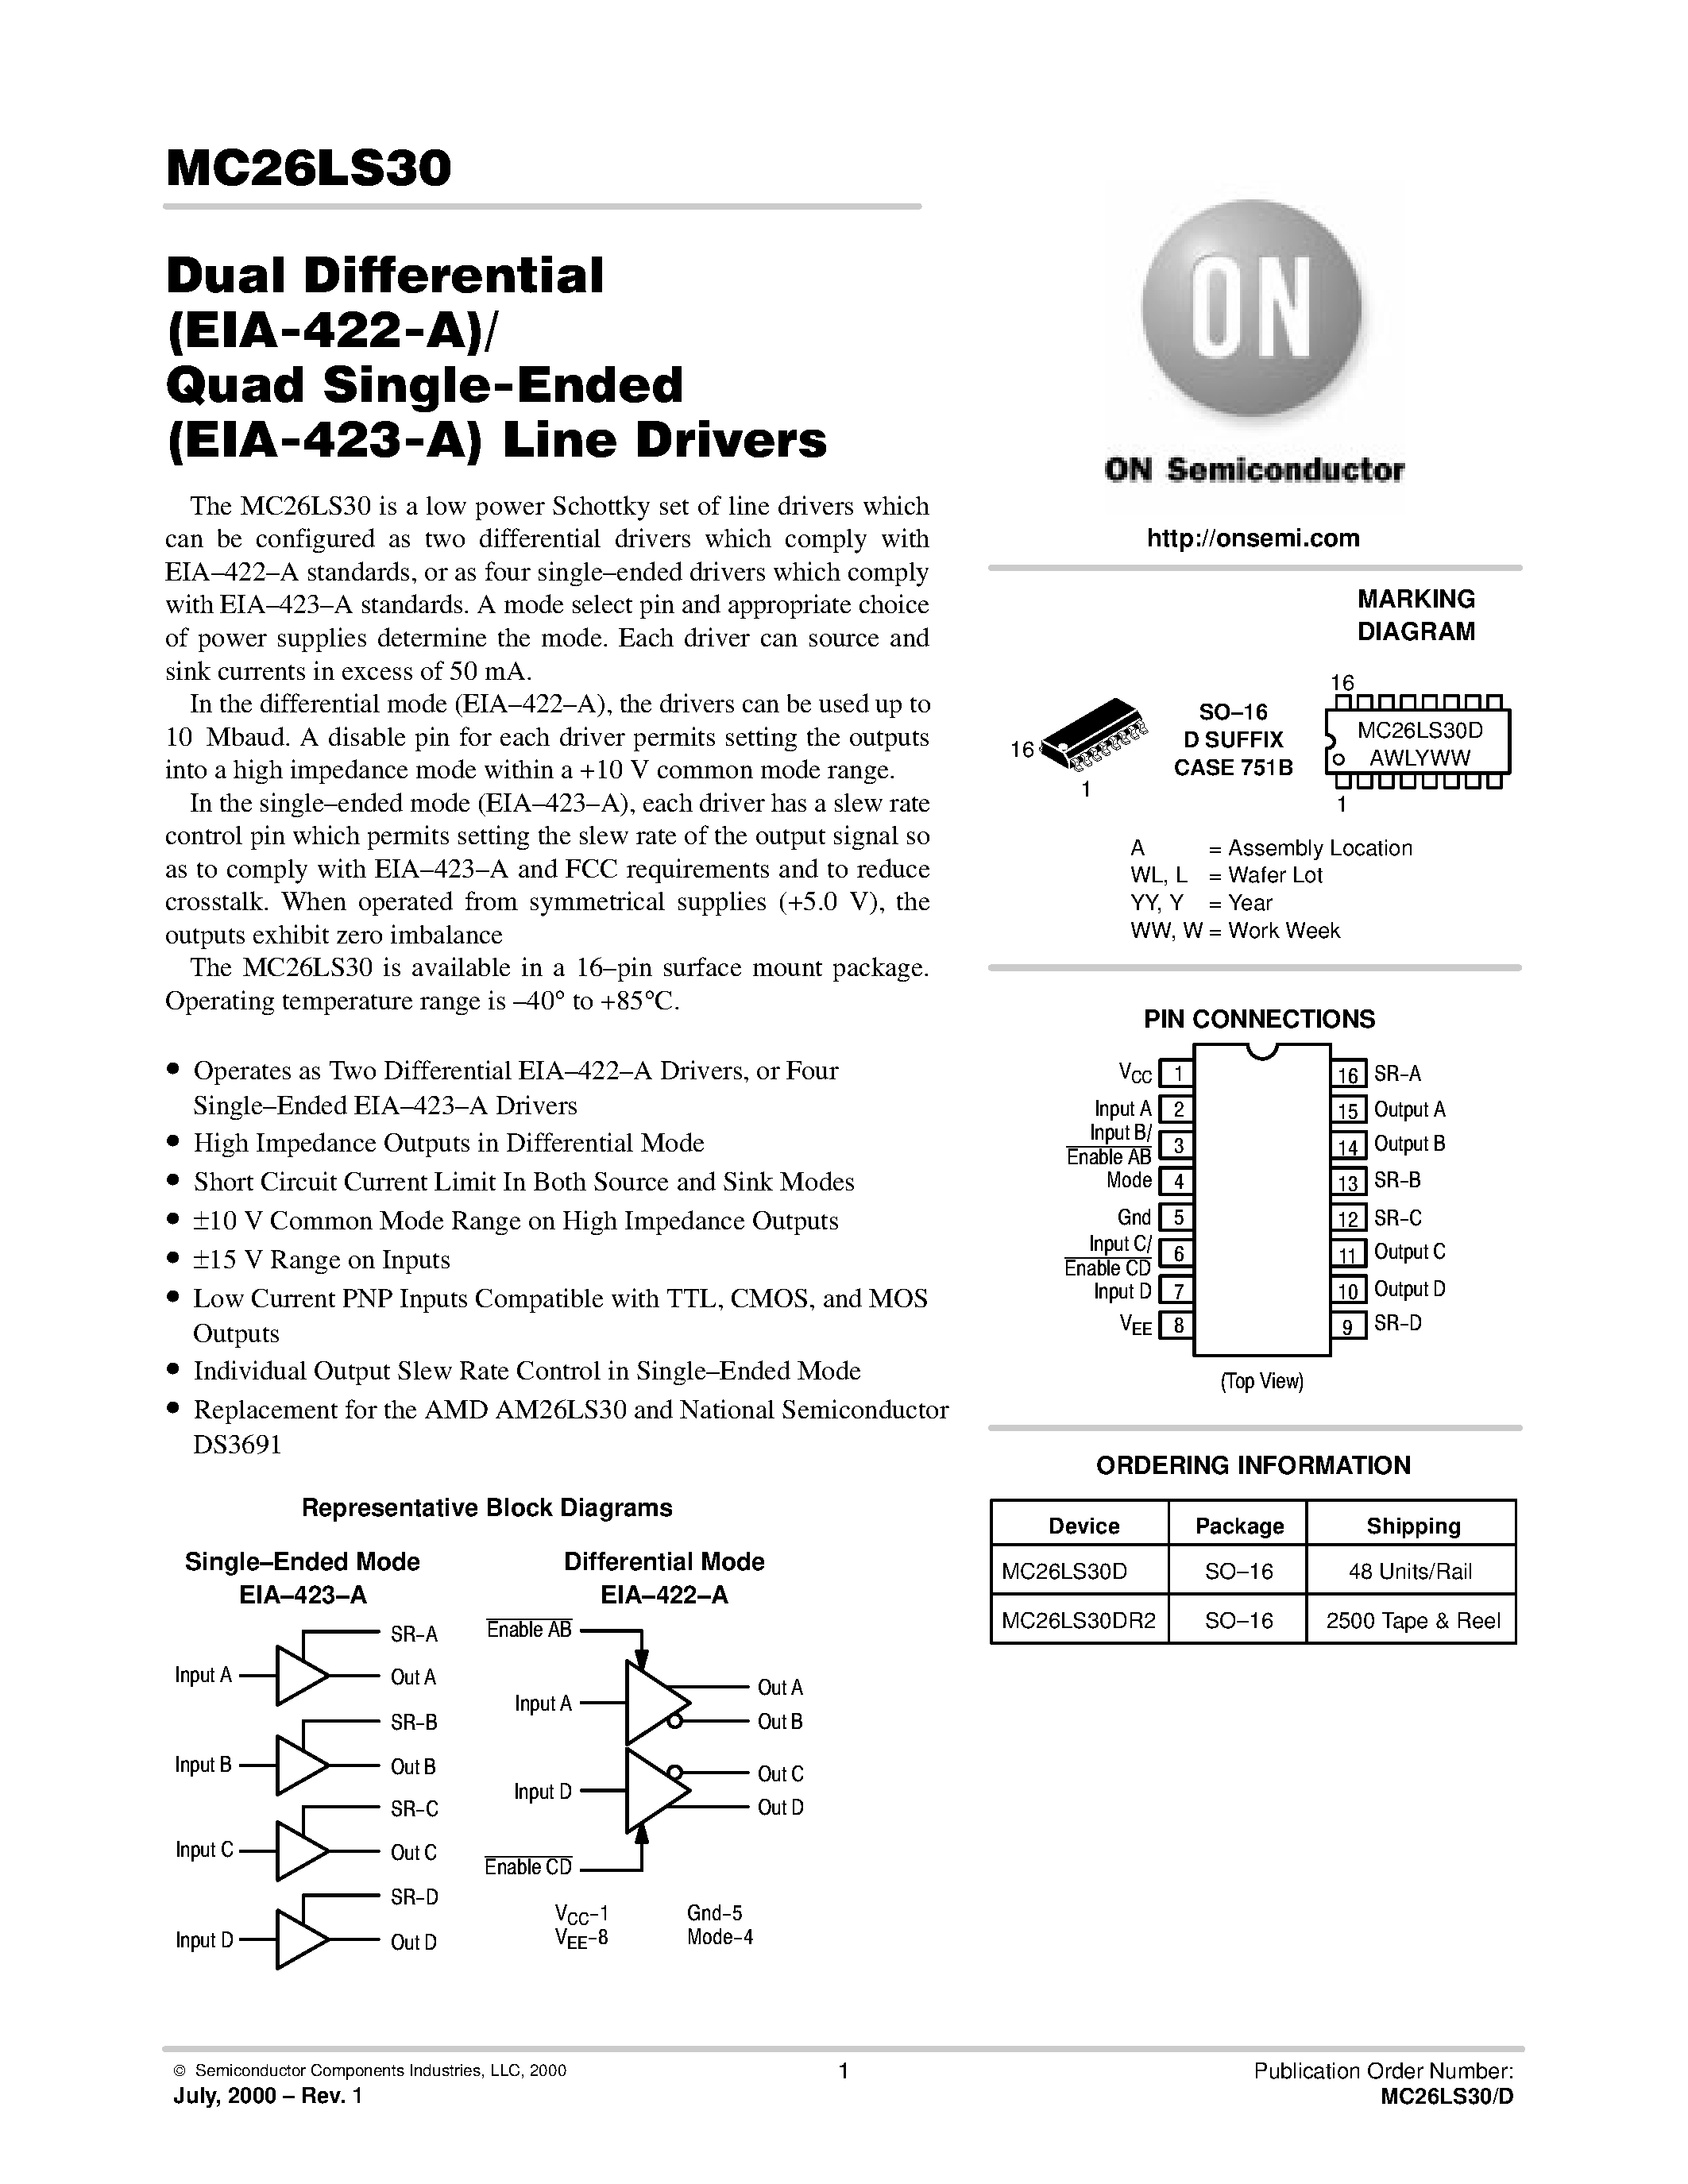 Datasheet MC26LS30 - Dual Differential Quad Single-Ended (EIA-423-A) Line Drivers page 1